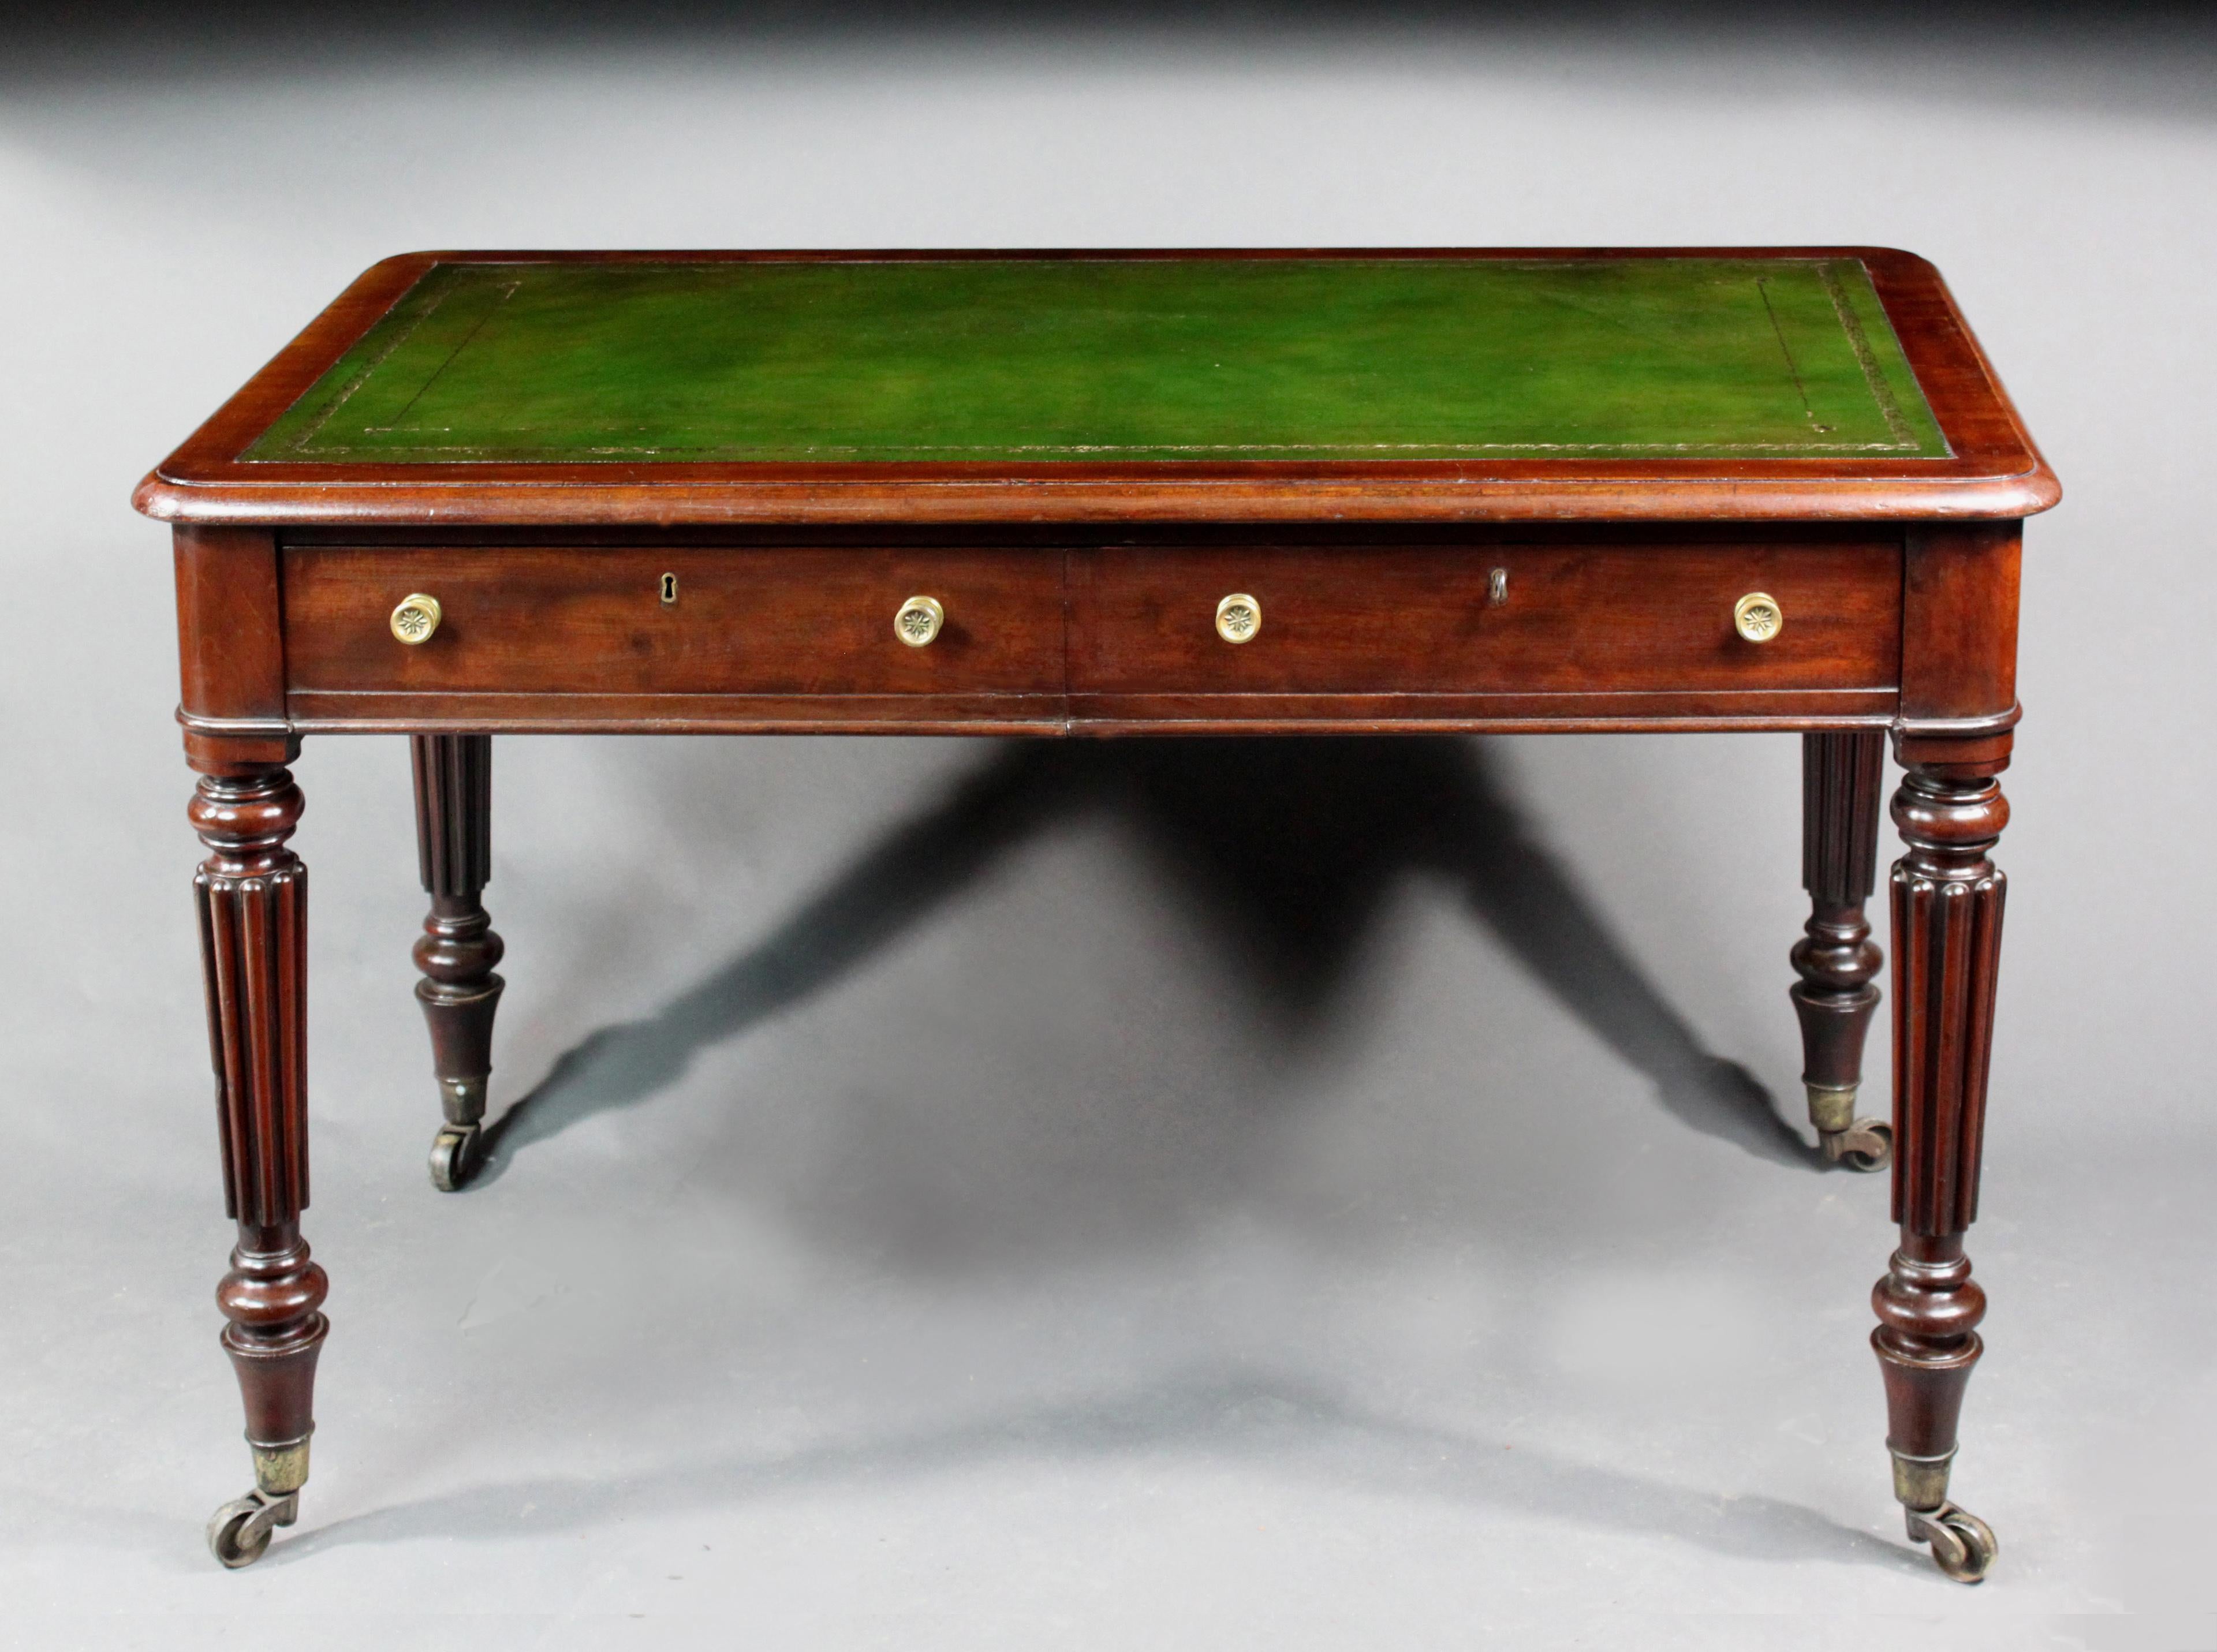 A small William IV mahogany writing on turned and reeded legs, 2 mahogany lined drawers with false drawers on the back and a fitted good quality green hide

Measures: Knee height 23.75